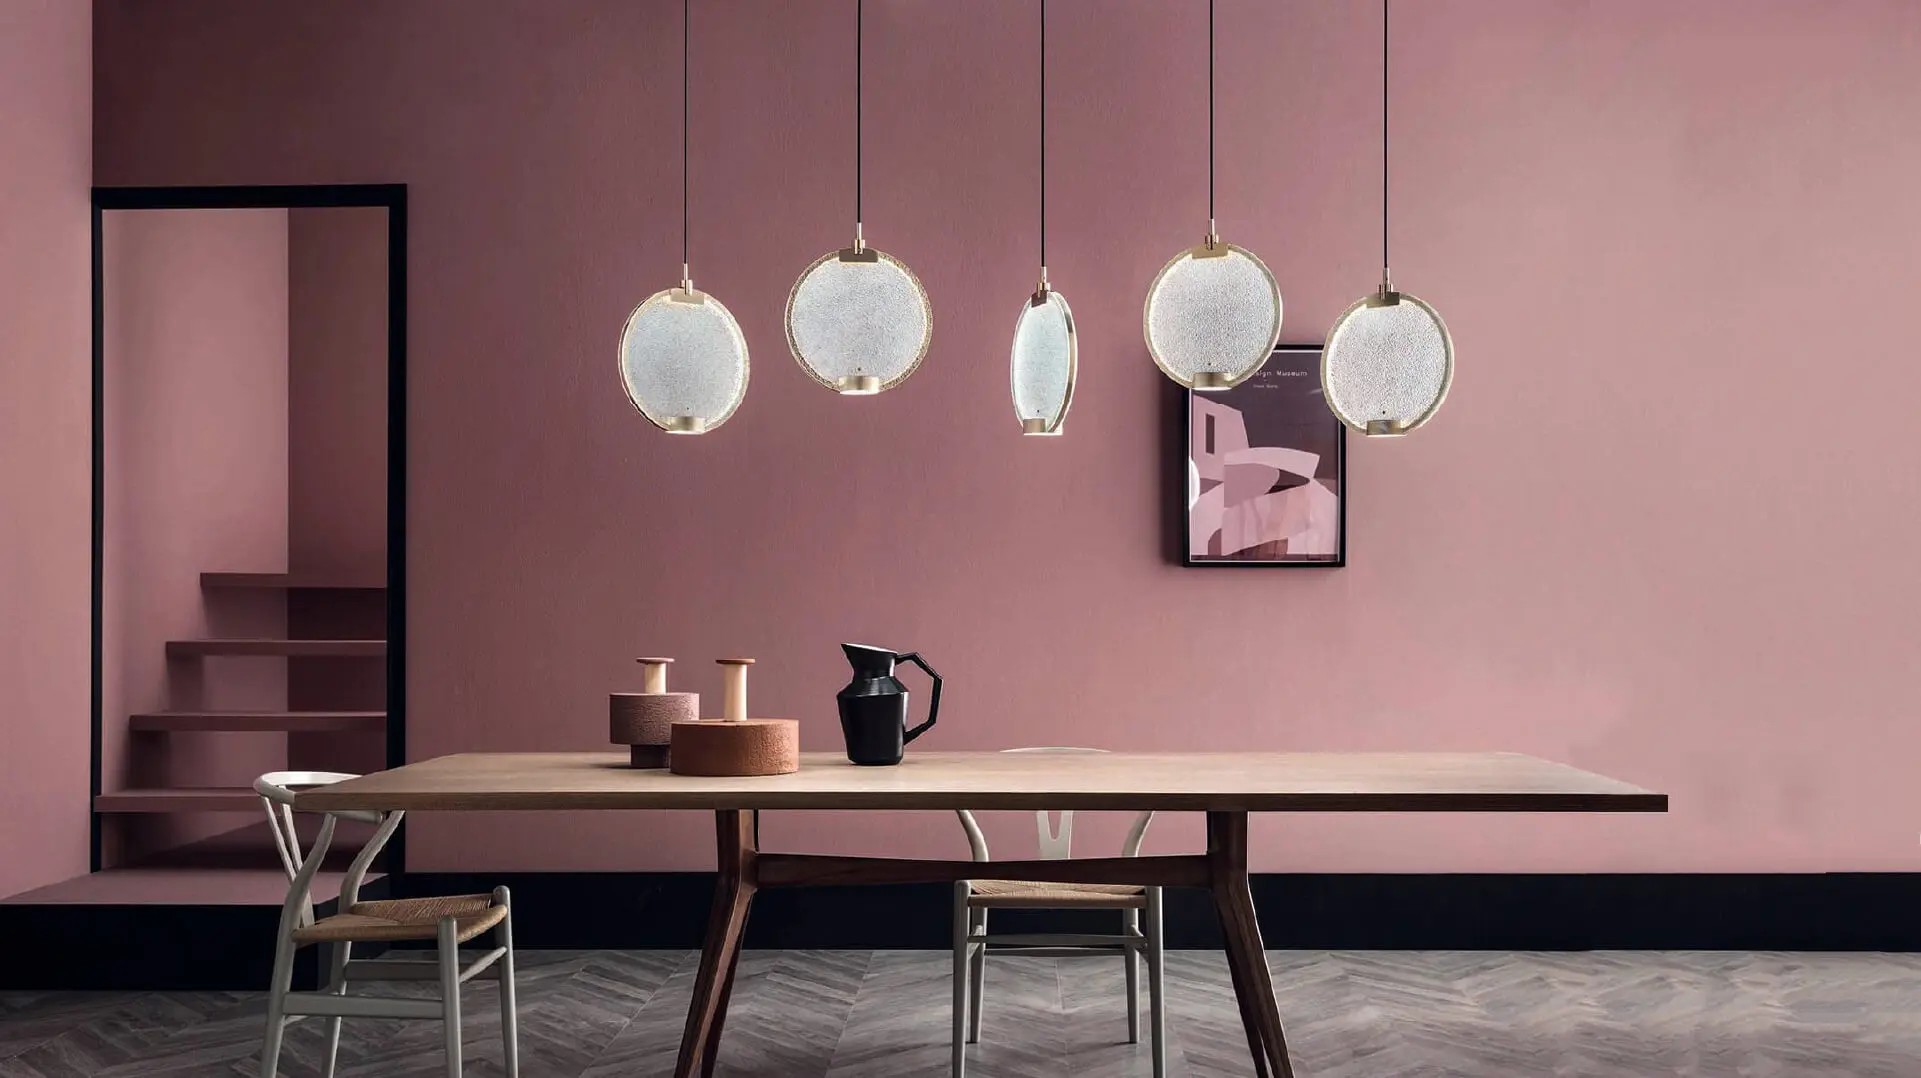 Horo by Pierre Gonalons for Masiero - hanging lights in dining room